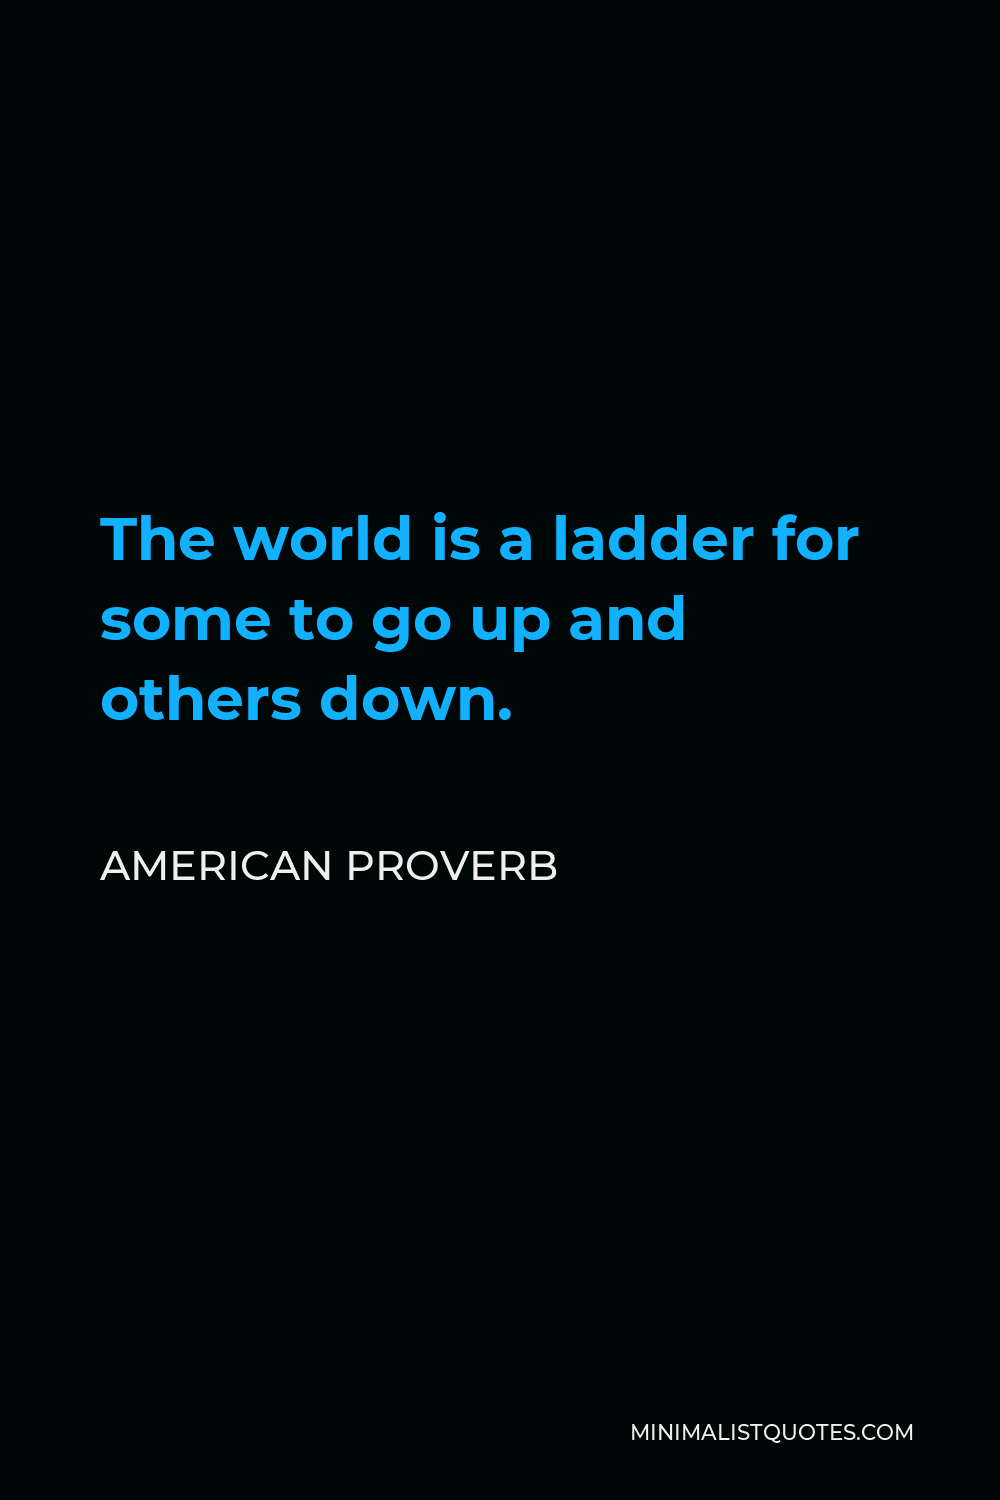 American Proverb Quote - The world is a ladder for some to go up and others down.